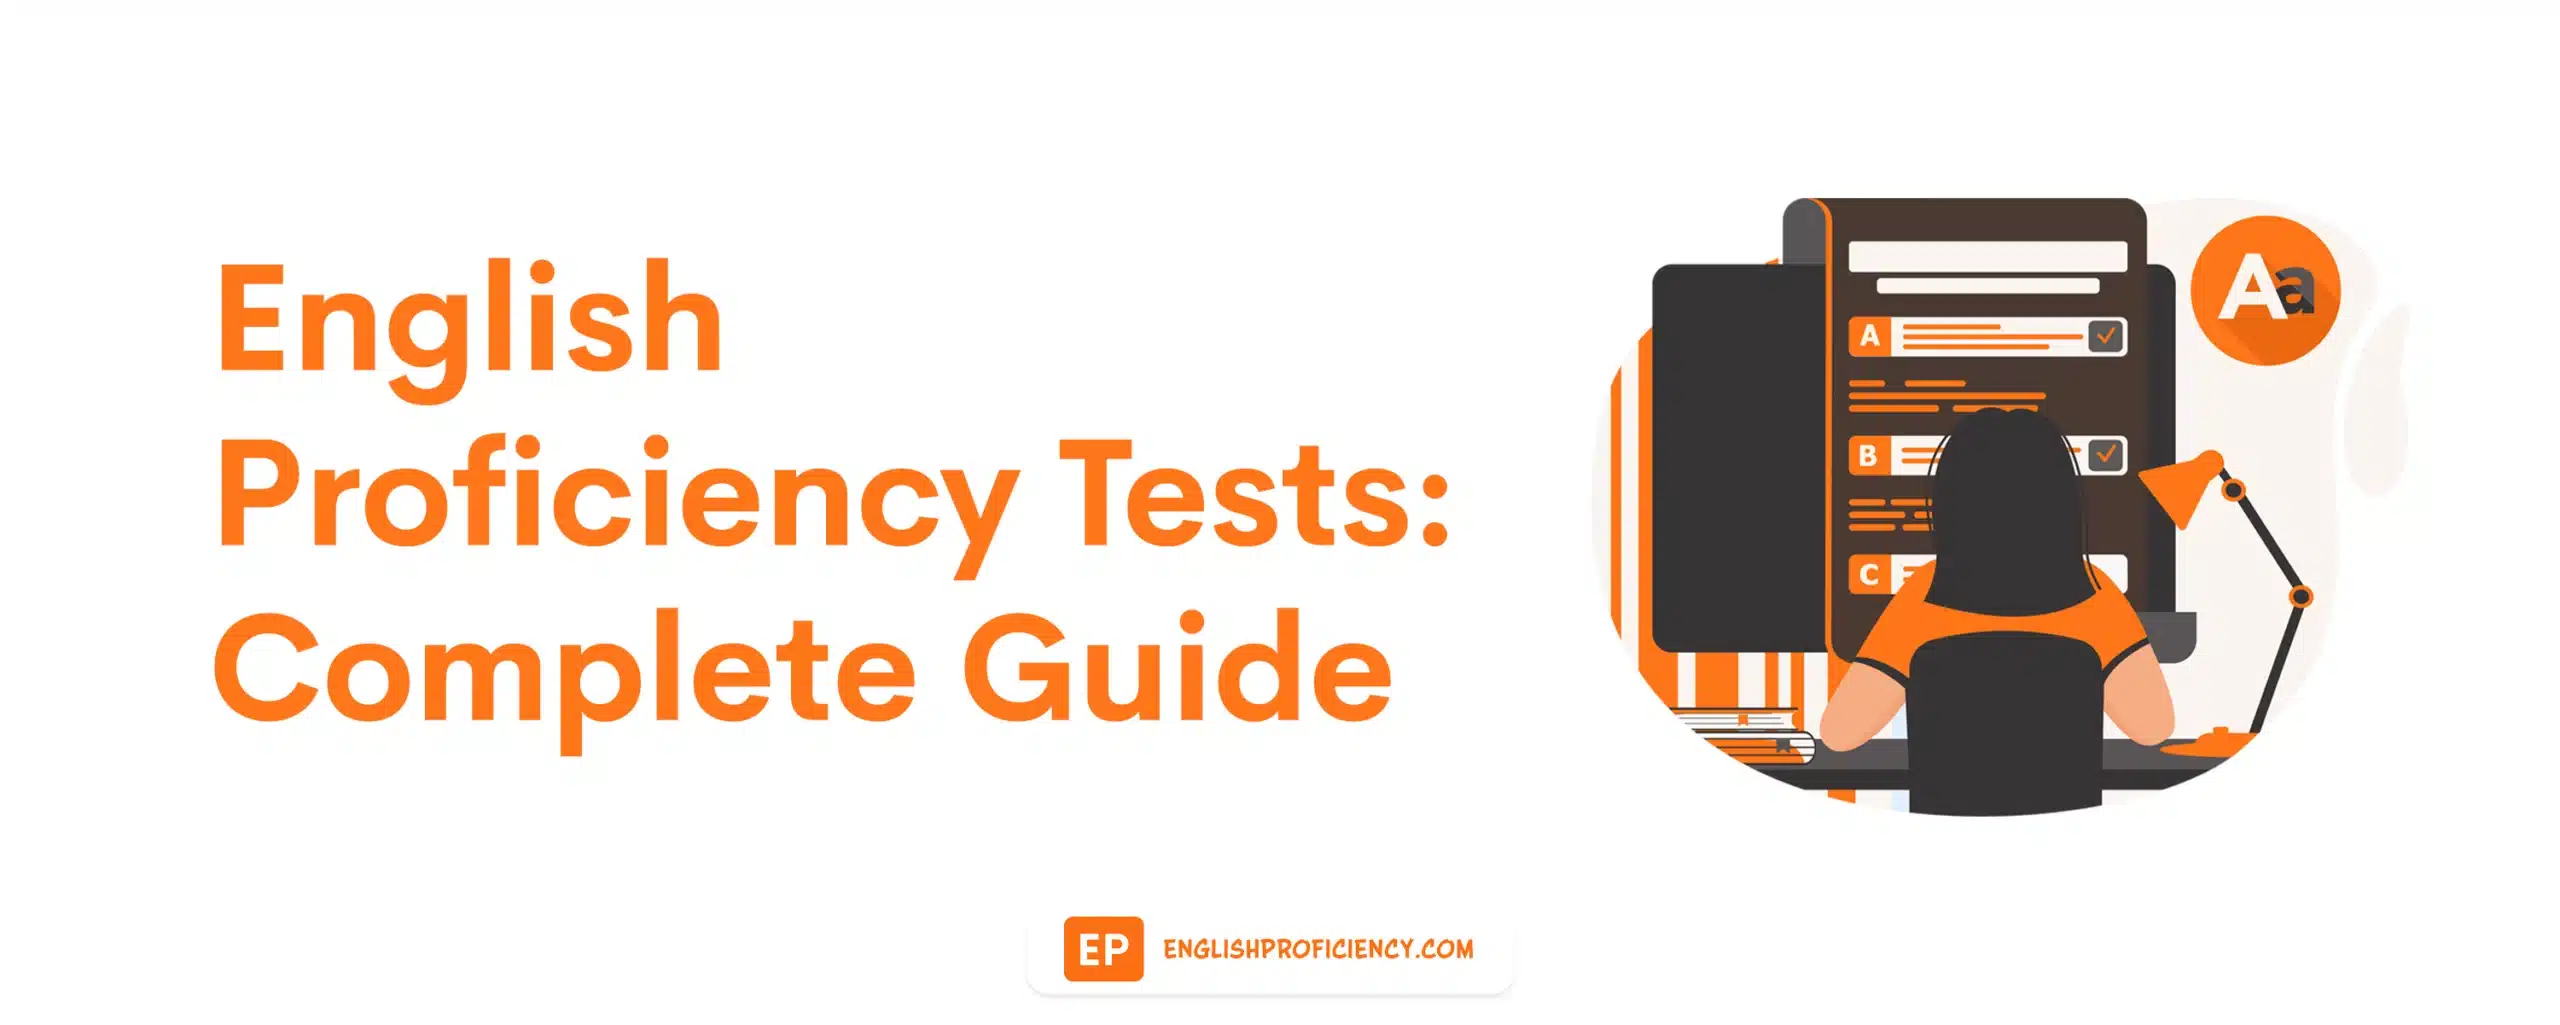 English Proficiency Tests Complete Guide